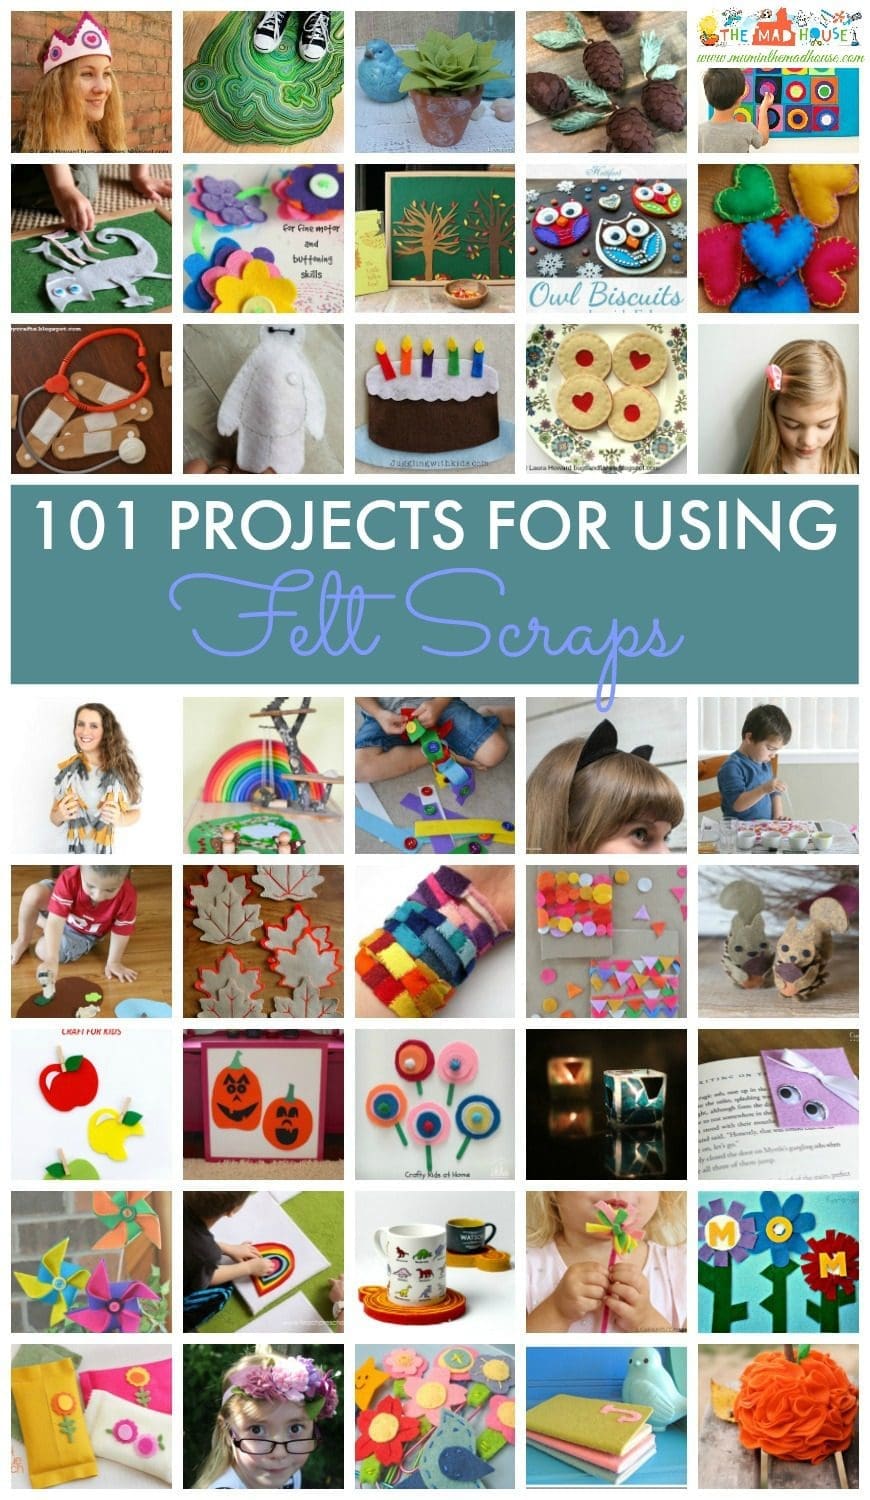 101 project ideas for using felt scraps. A selection of ideas for felt boards and projects for younger kids, tweens, teens and adults including simple sewing. Felt is such a flexible craft material.